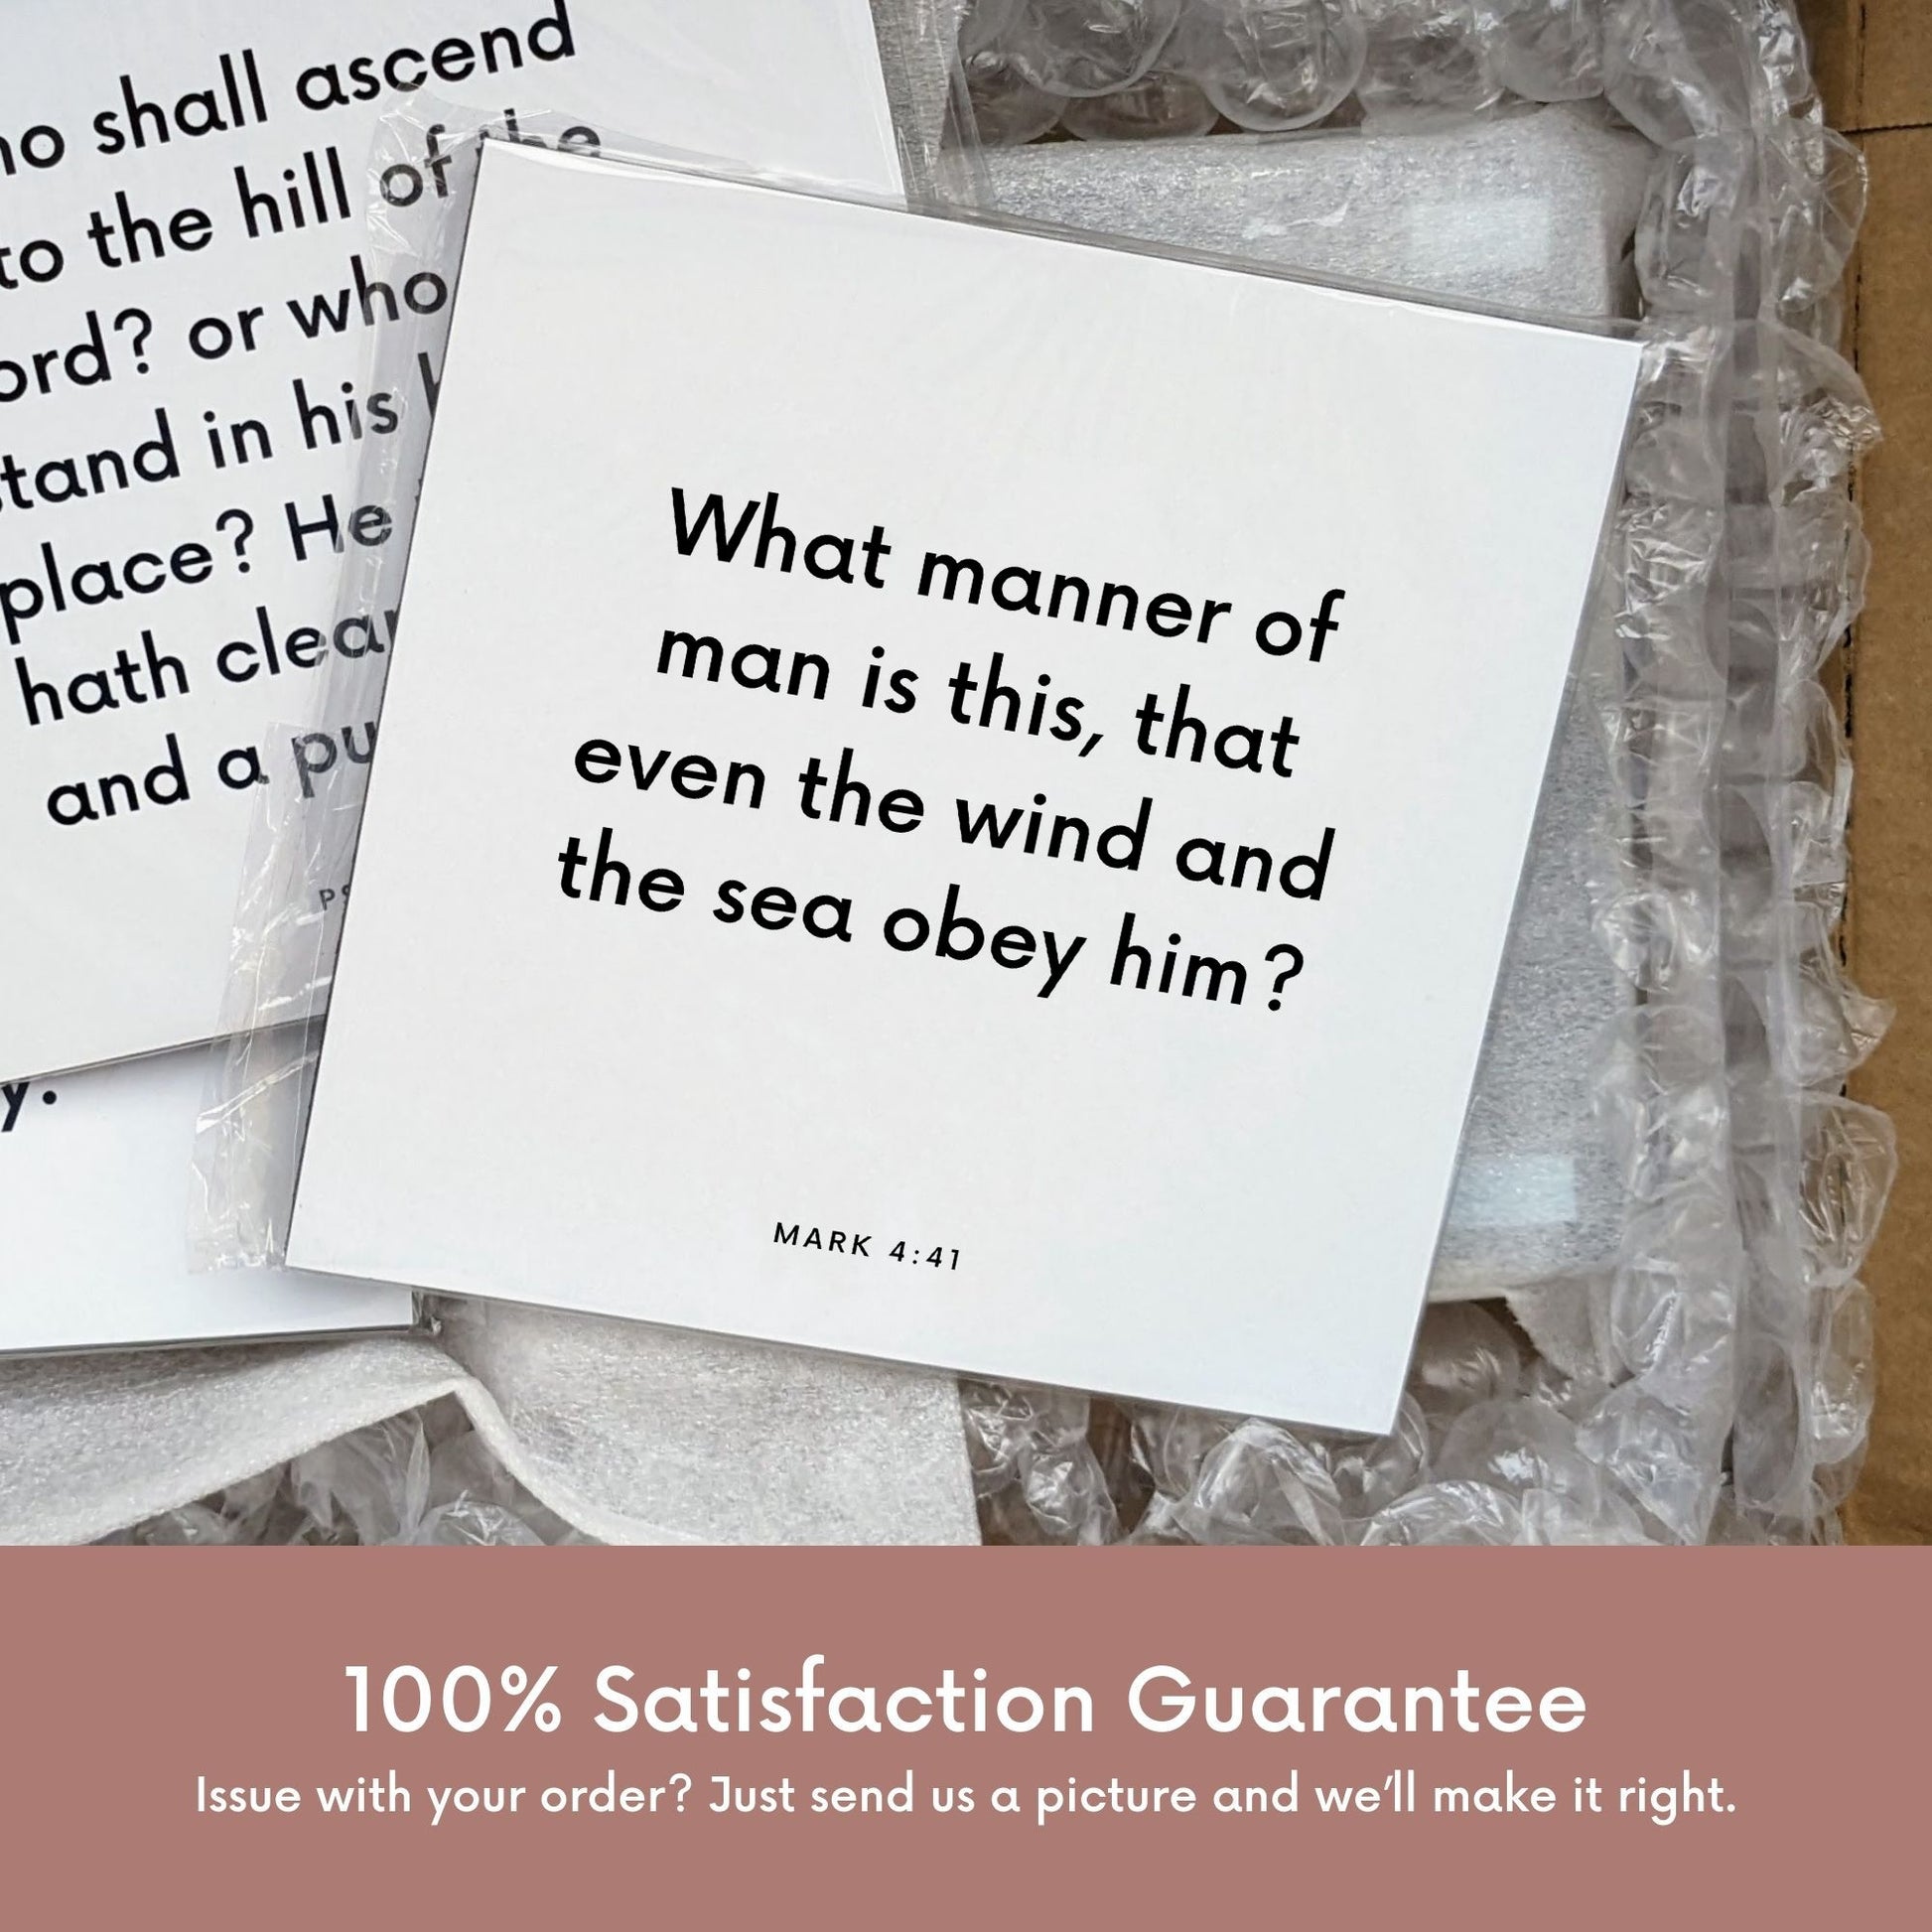 Shipping materials for scripture tile of Mark 4:41 - "What manner of man is this?"